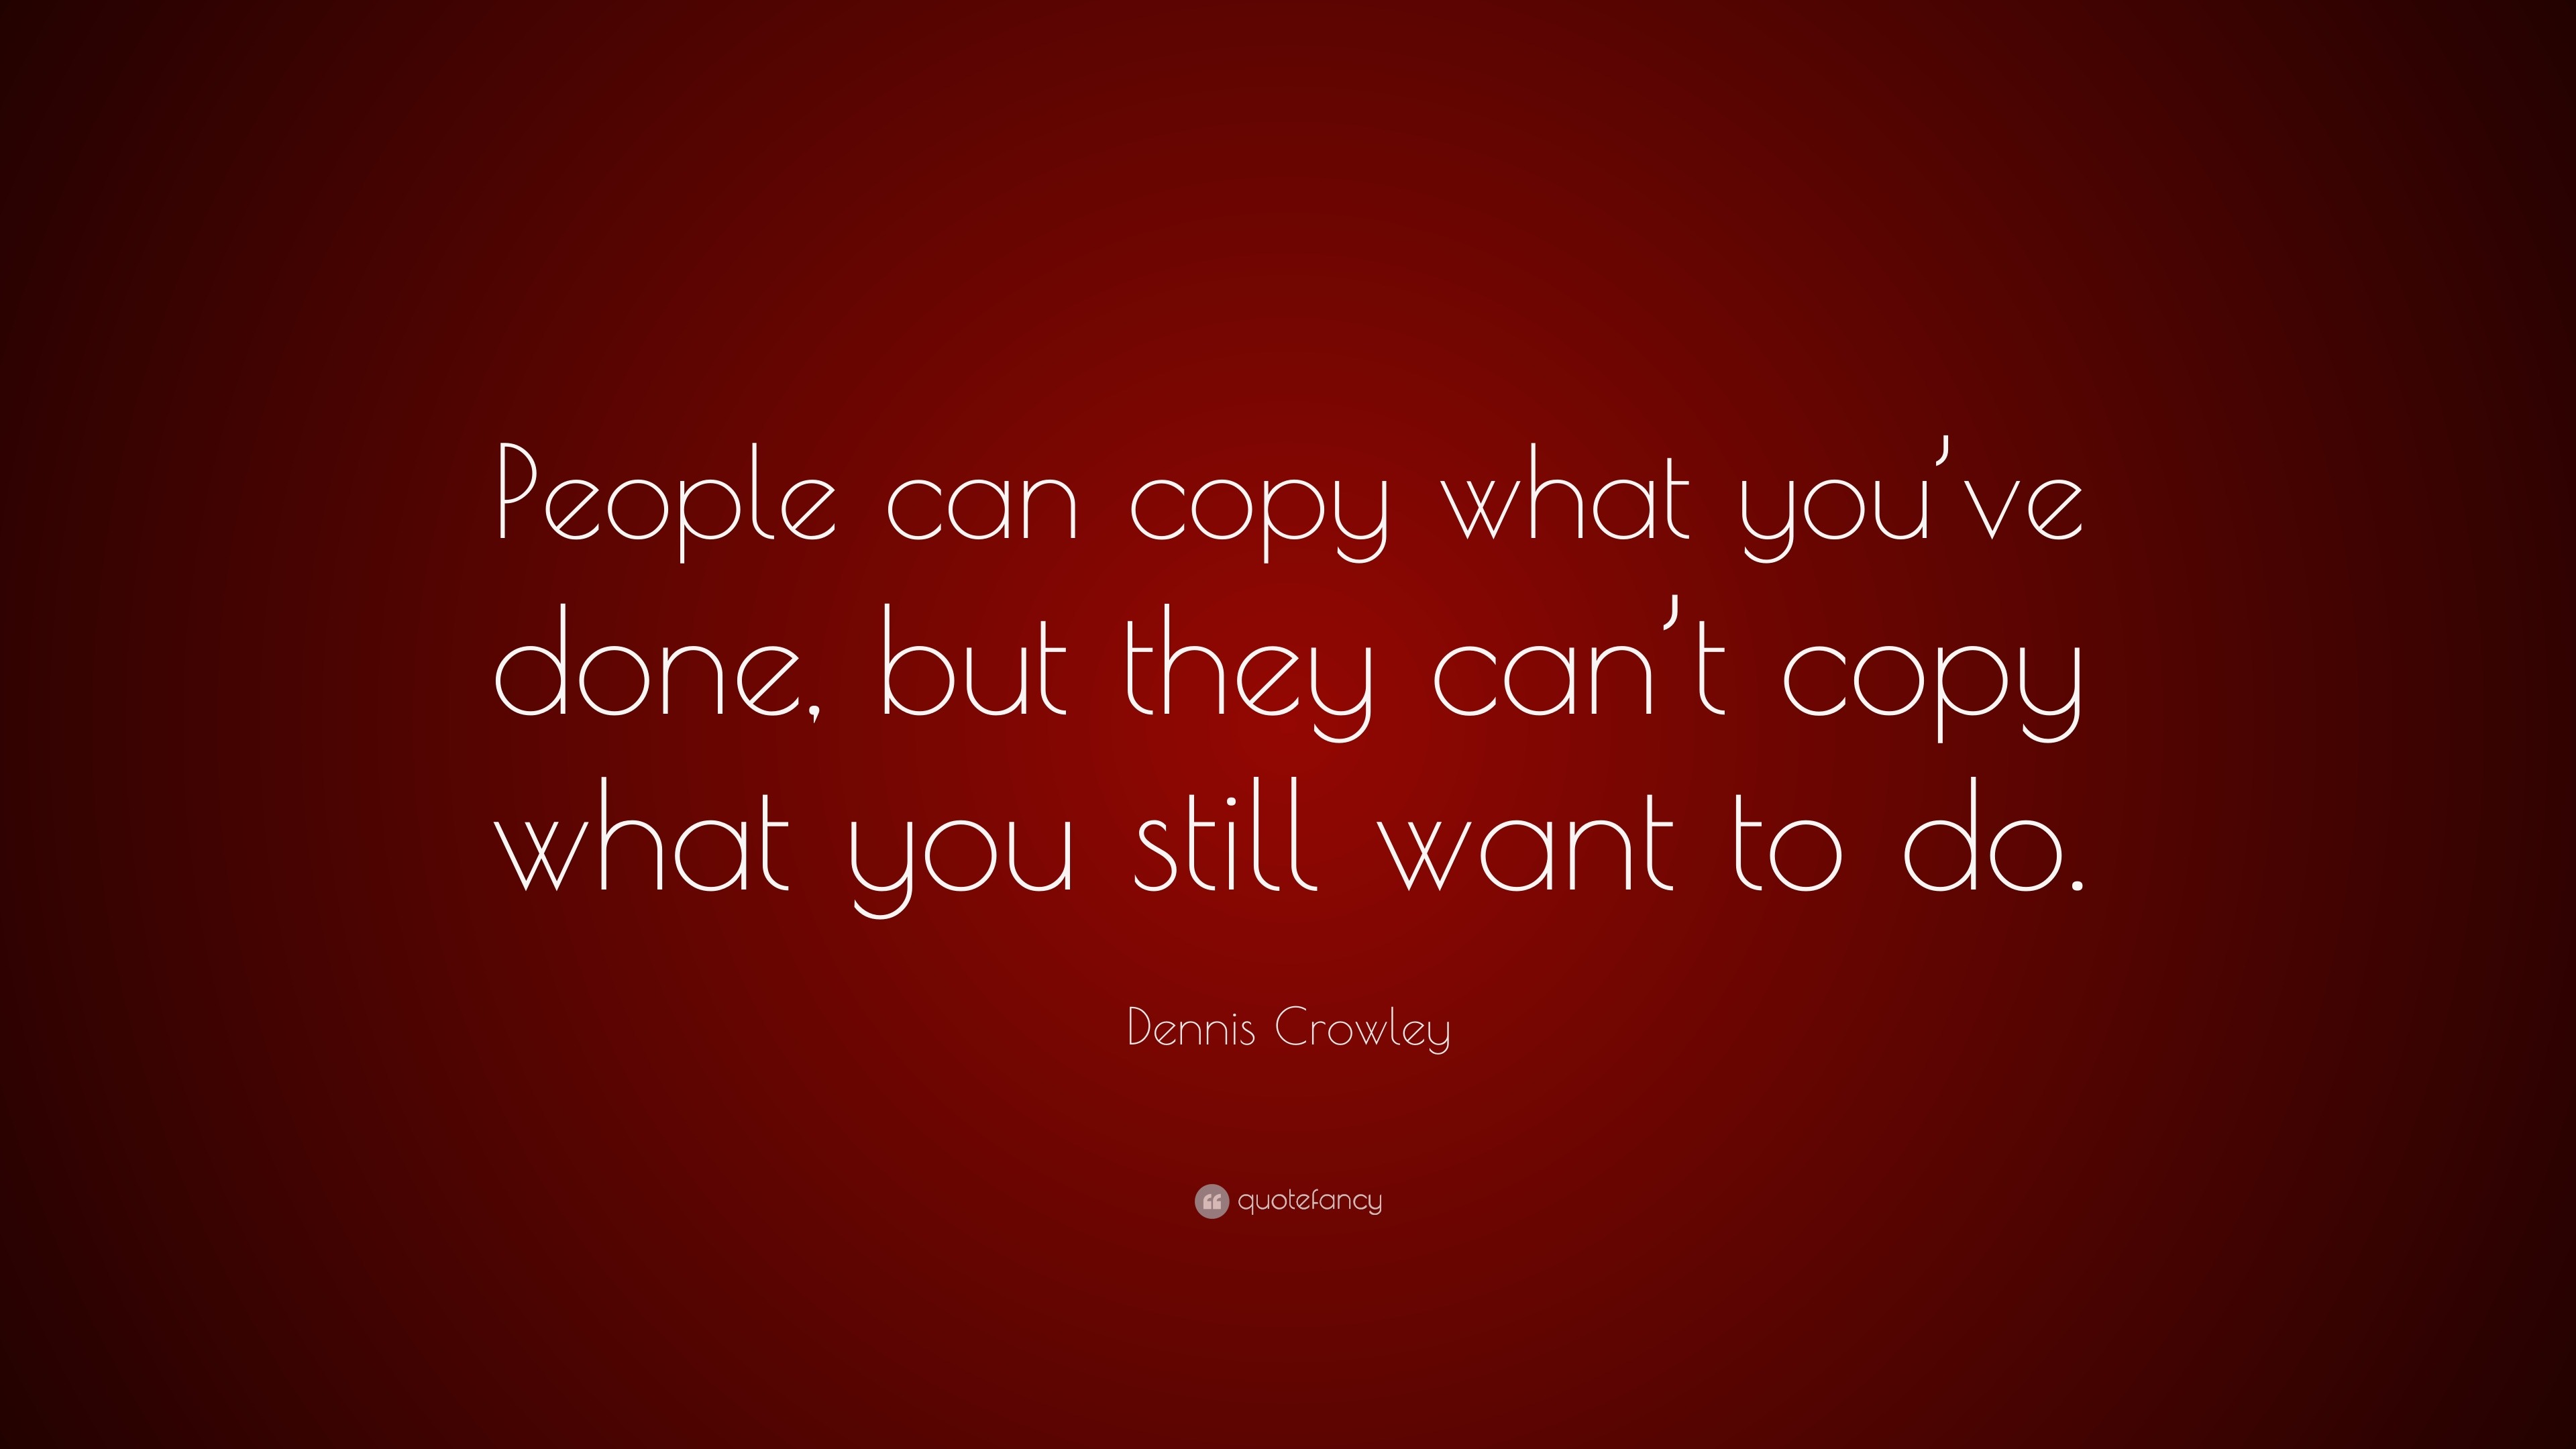 Dennis Crowley Quote: “People Can Copy What You've Done, But They Can't Copy What